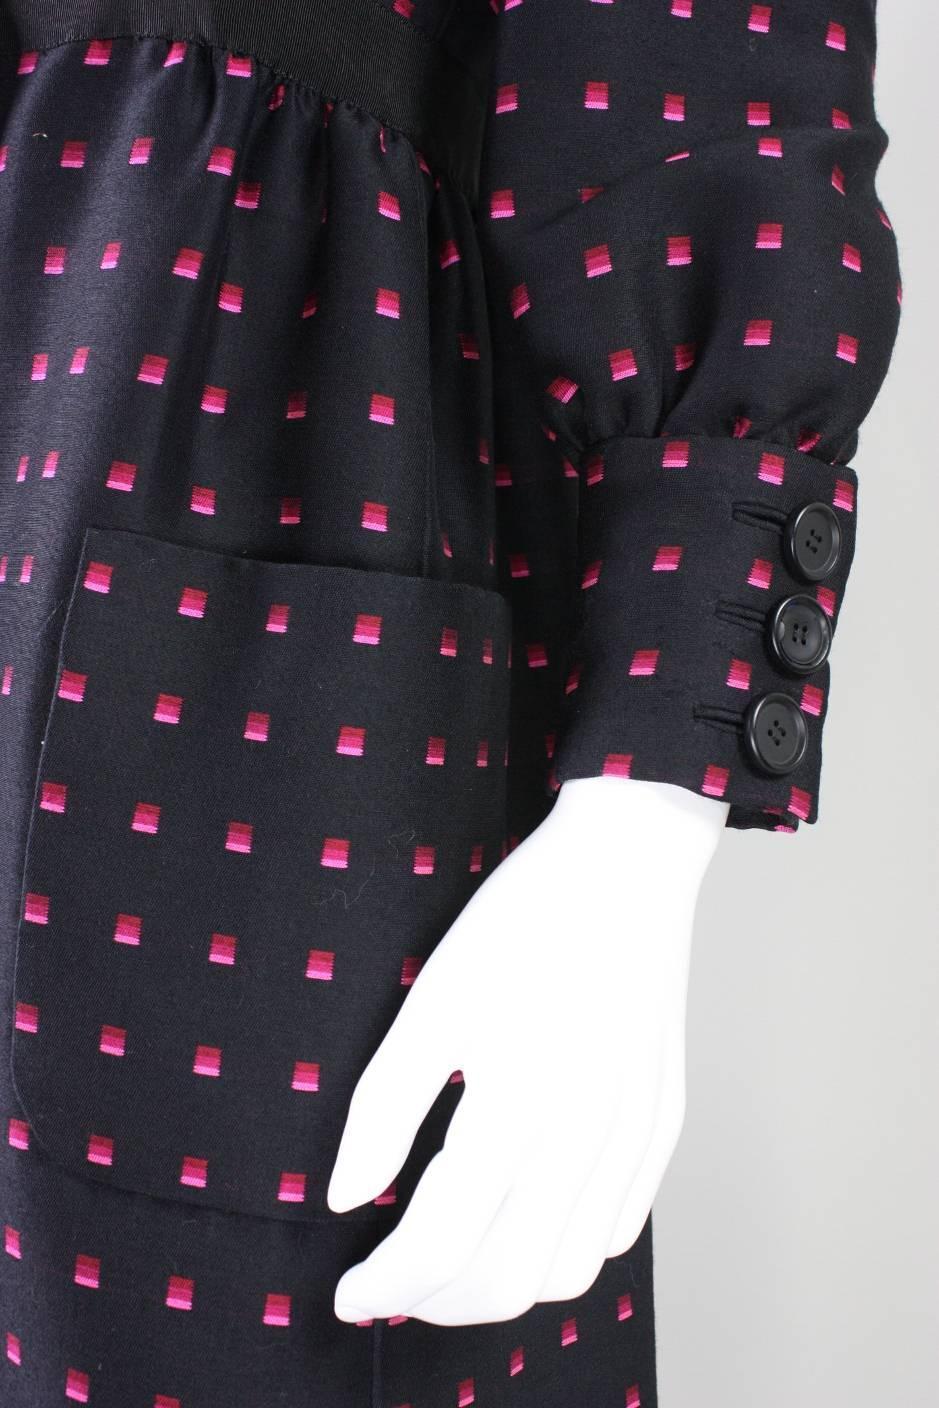 1960's Chester Weinberg Dress with Geometric Print For Sale 2